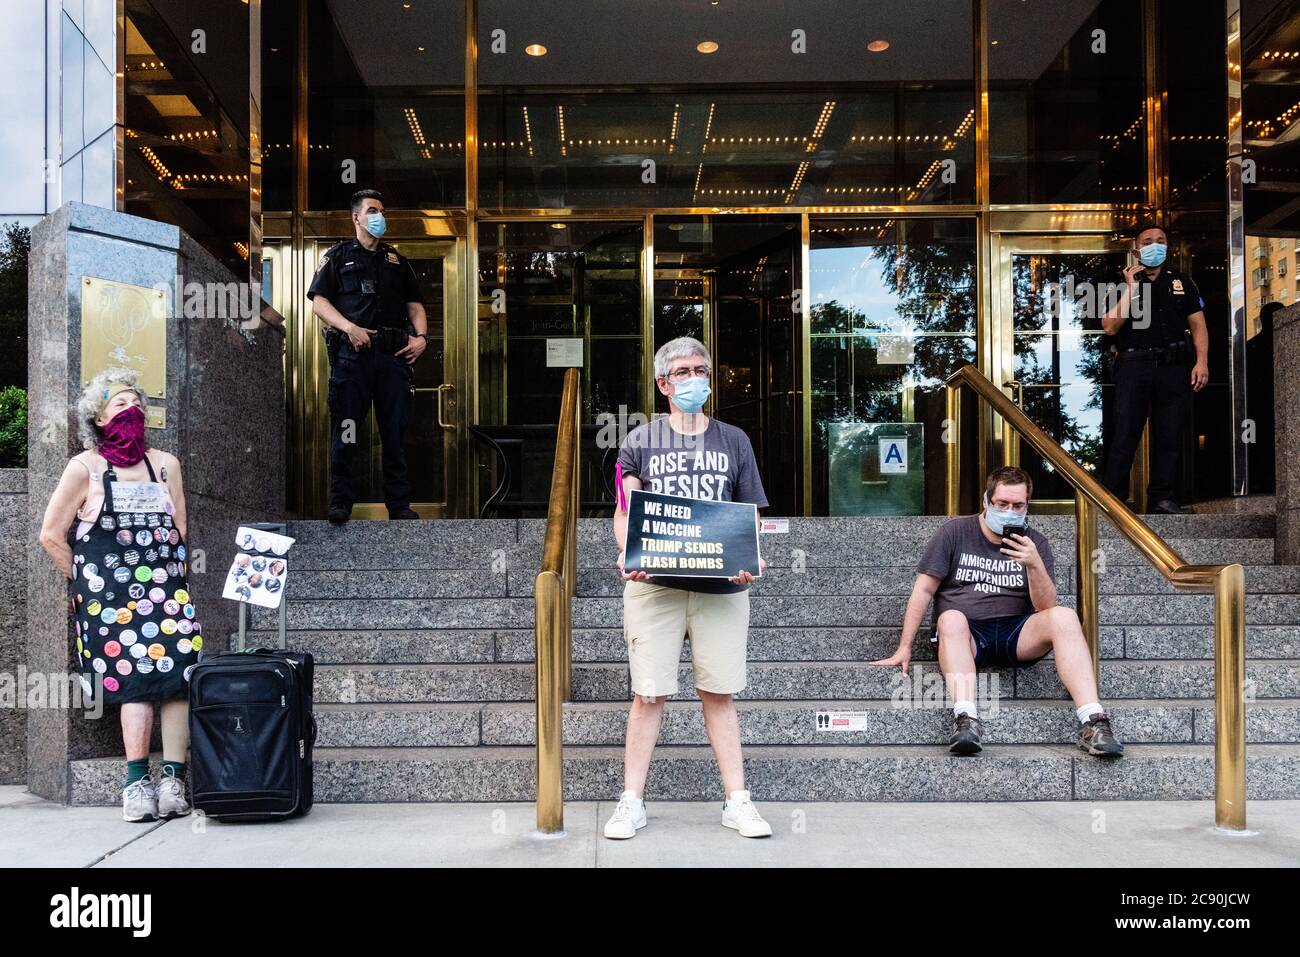 Rise and Resist activists attend a vigil in support of Black Lives Matter and protesting Trump's policies outside Trump International Hotel and Tower in New York City on July 27, 2020. (Photo by Gabriele Holtermann/Sipa USA) Credit: Sipa USA/Alamy Live News Stock Photo